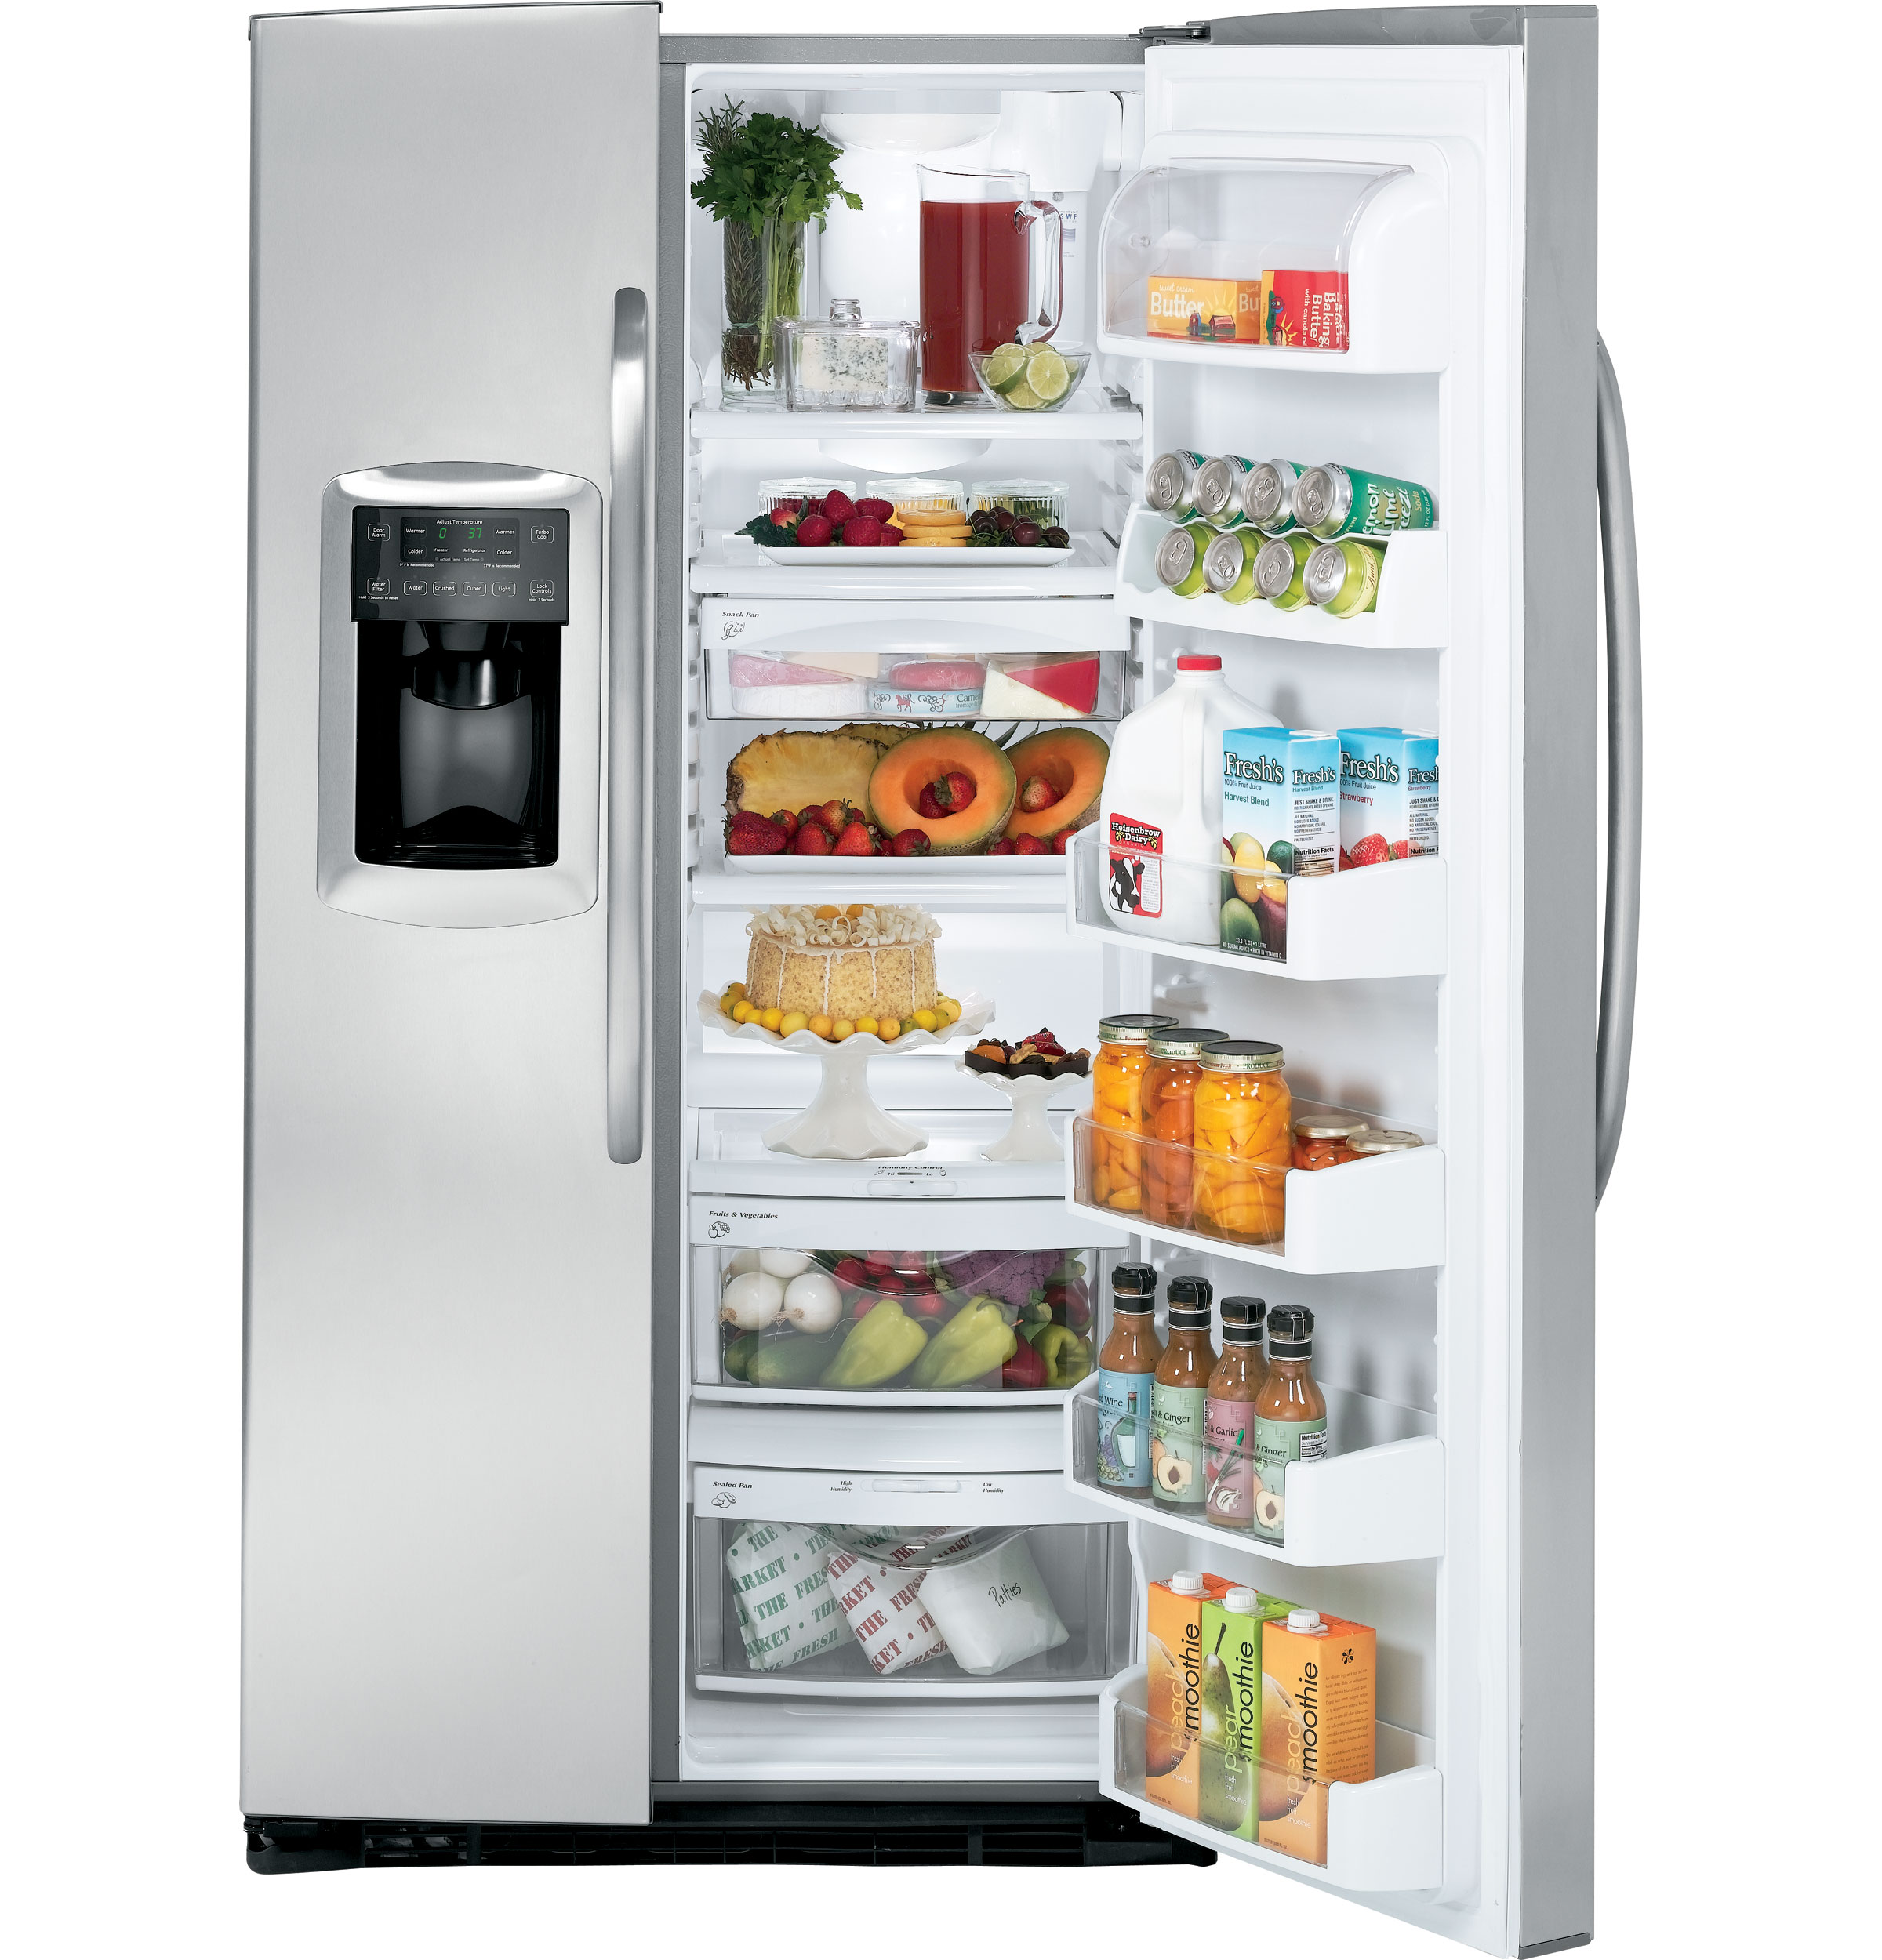 GE® ENERGY STAR® 25.4 Cu. Ft. Capacity Side-By-Side Refrigerator with Dispenser